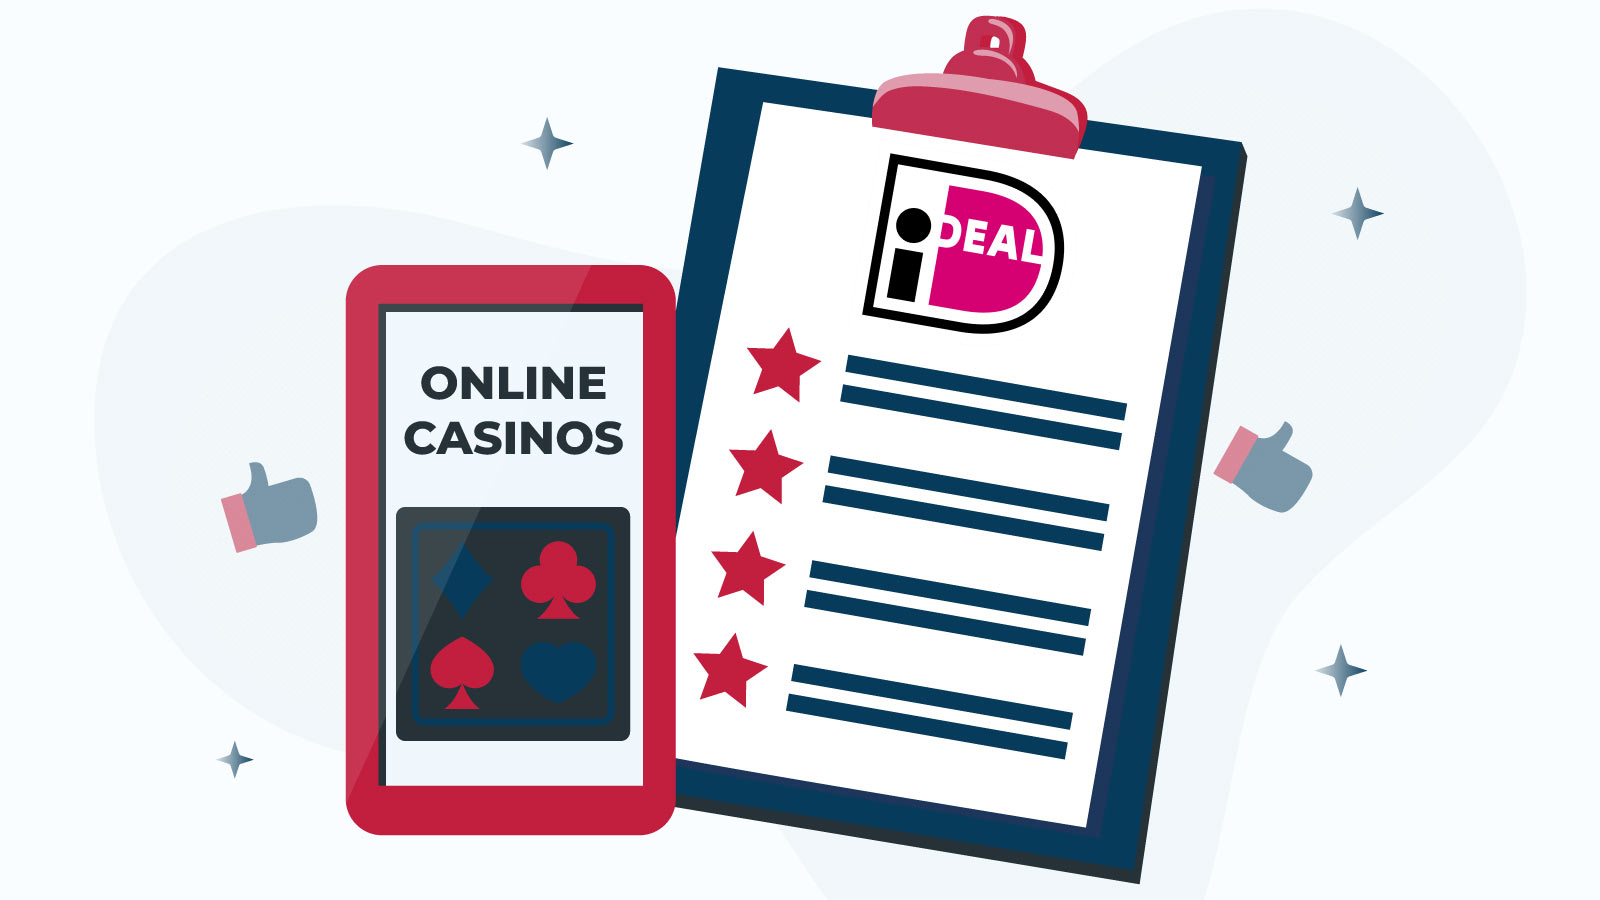 Our top iDeal online casinos offer